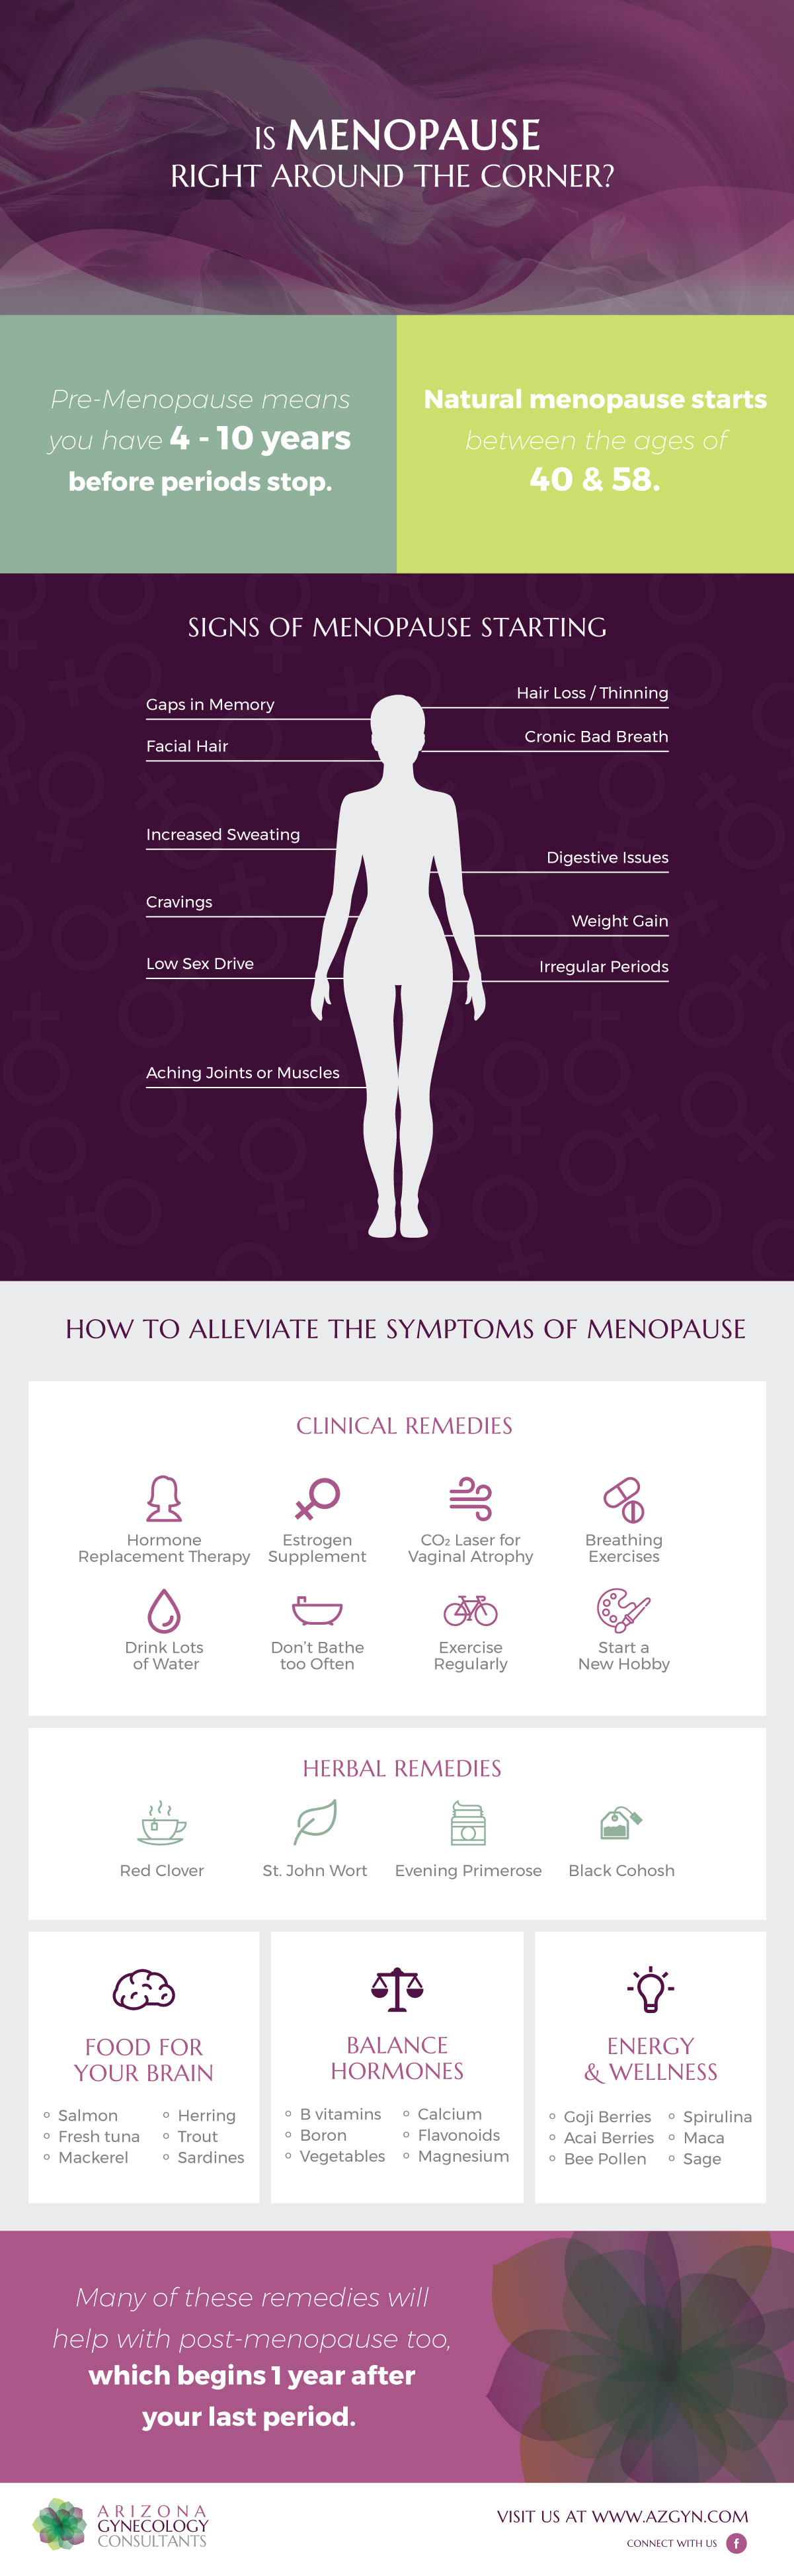 Signs Symptoms and Holistic Clinical Remedies for Menopause Infographic - Arizona Gynecology